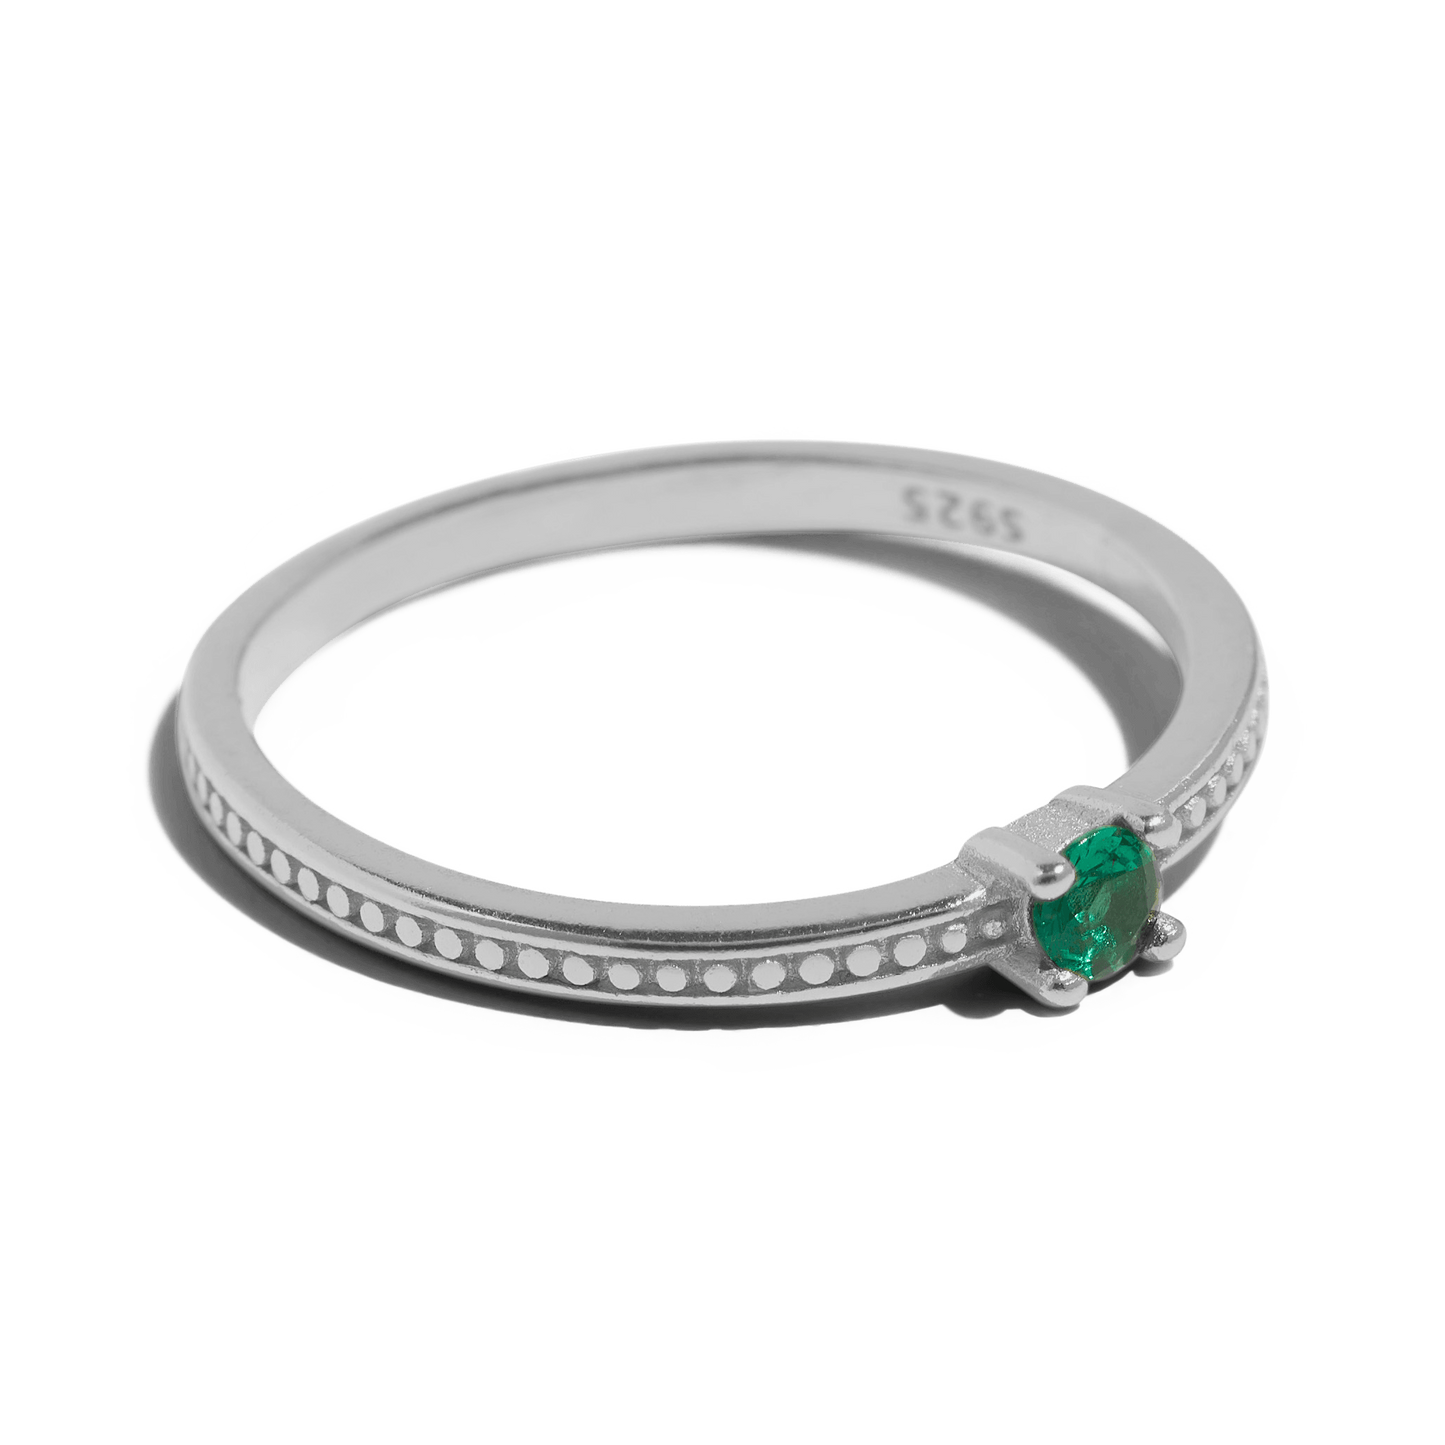 THE EMMA RING GREEN - Solid 14k white gold